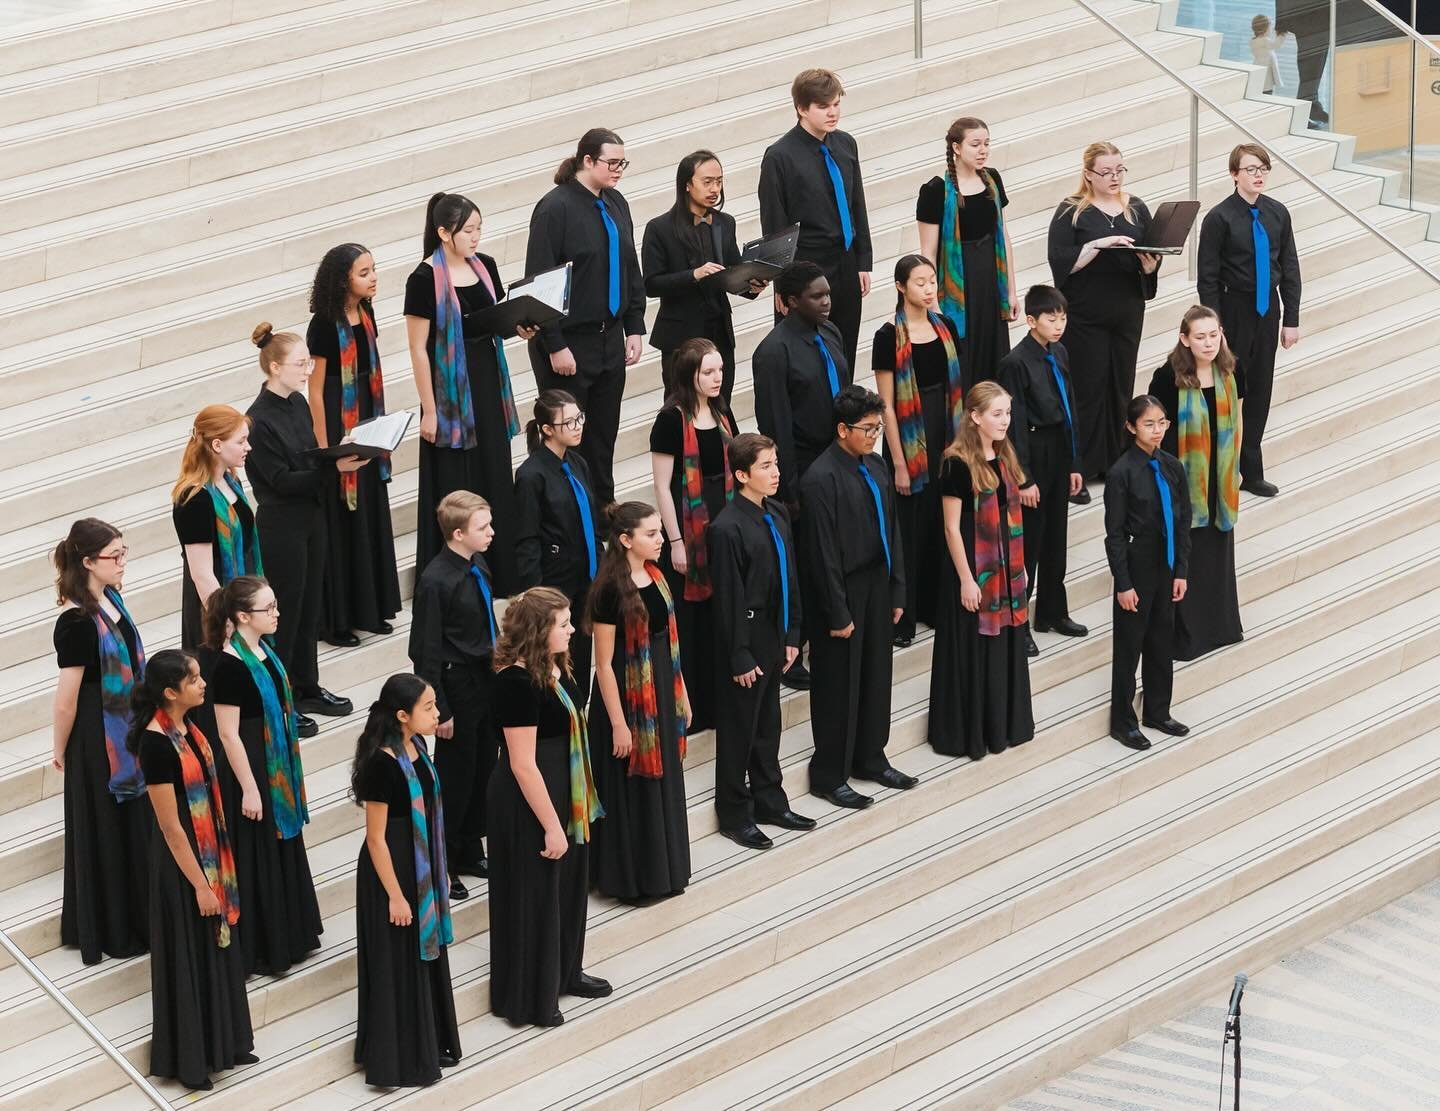 Do you have your tickets yet for our Spring Concert?! 💐

Featuring our Resound &amp; Youth choirs, this concert will showcase music from around the globe - including many recently composed &amp; brand new choral music! 

We can&rsquo;t wait to share